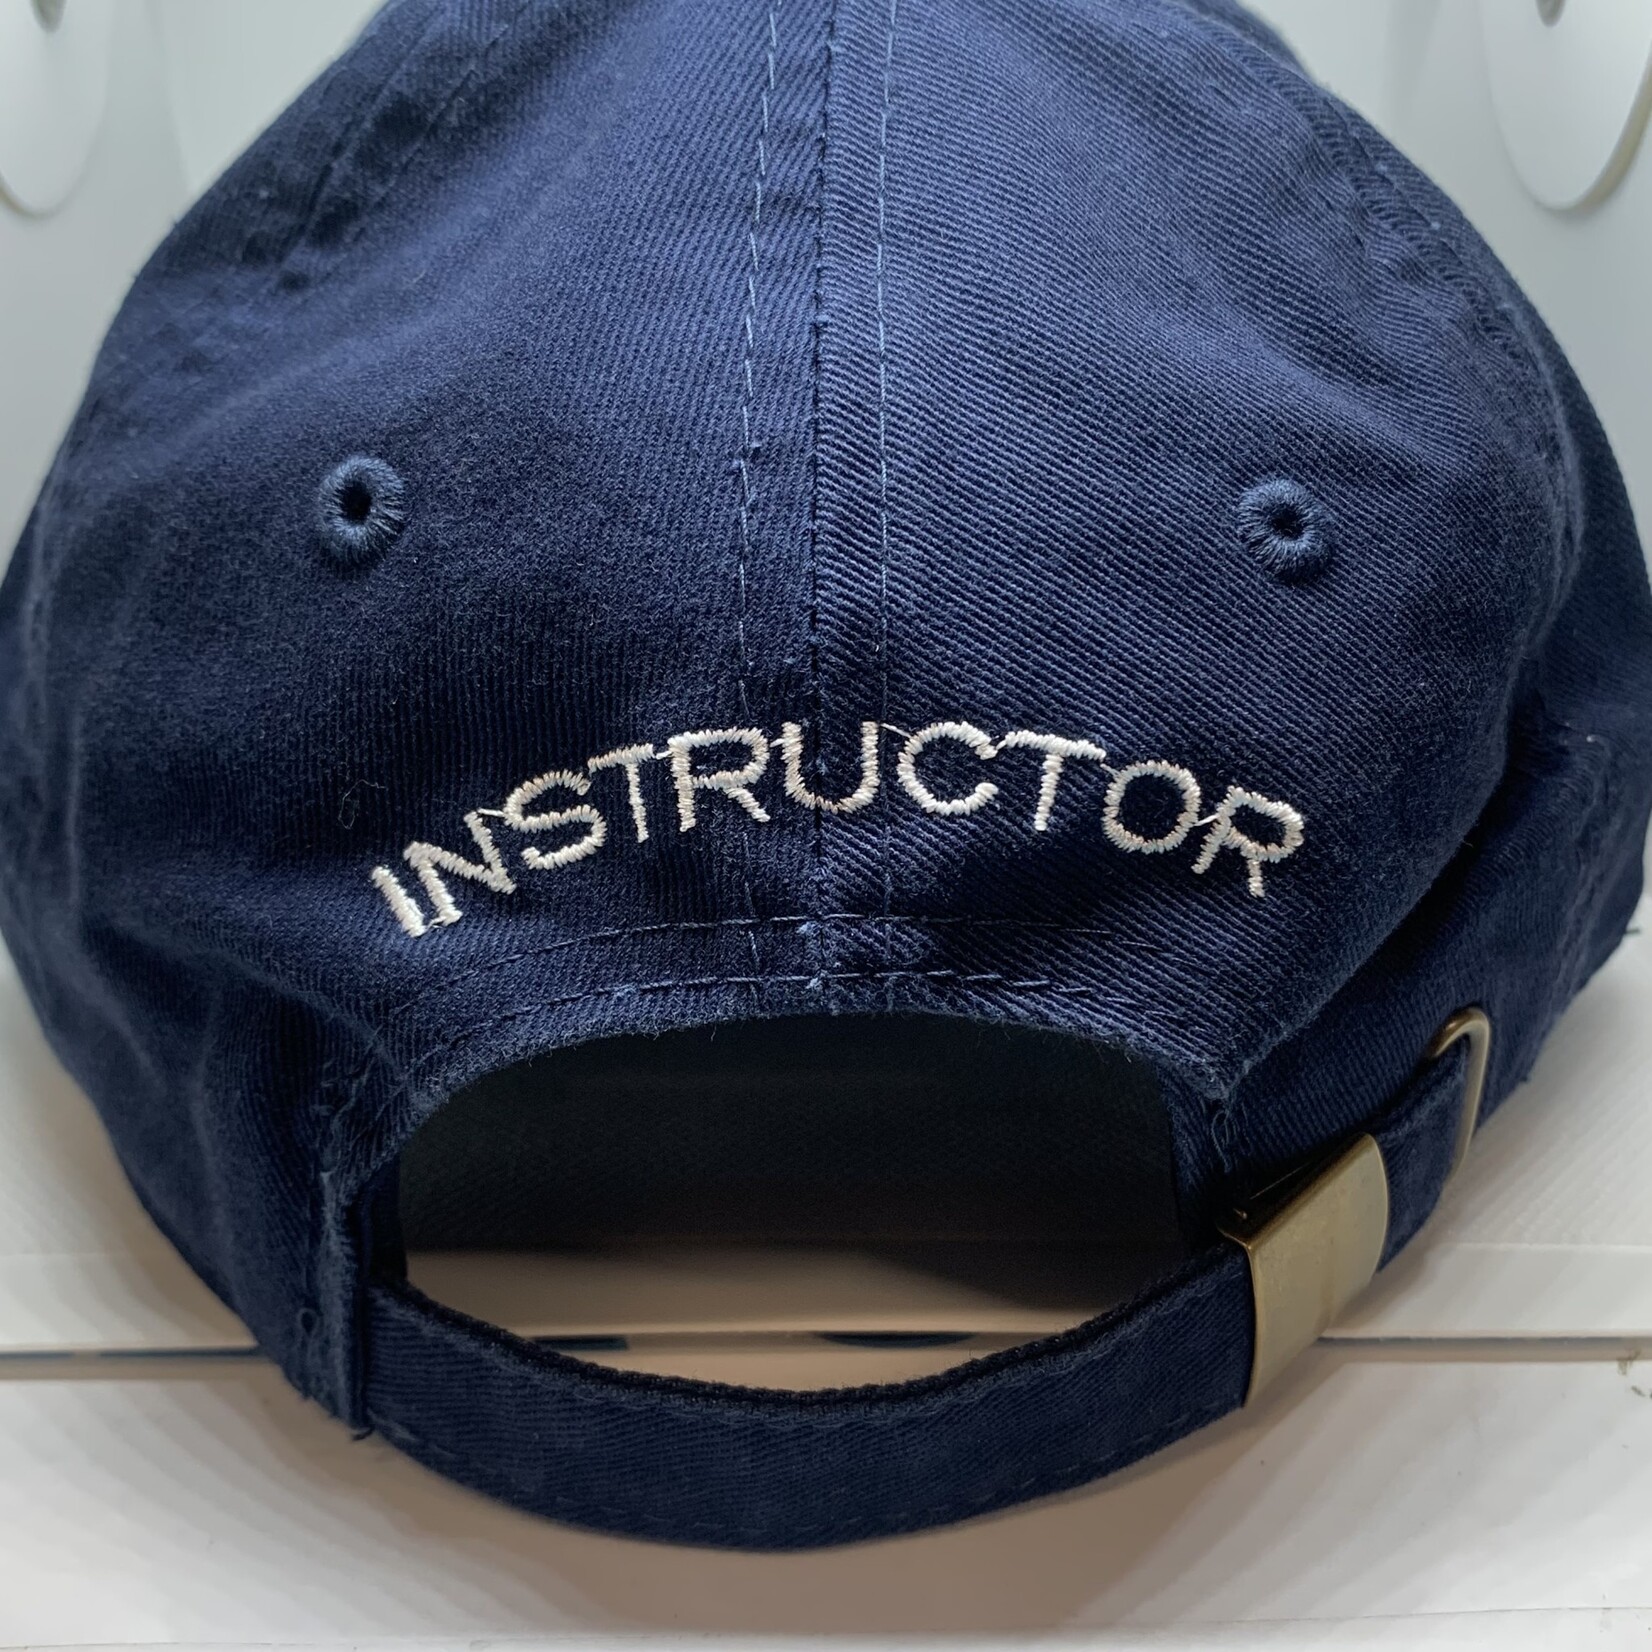 Navy Powerboating Hat Instructor